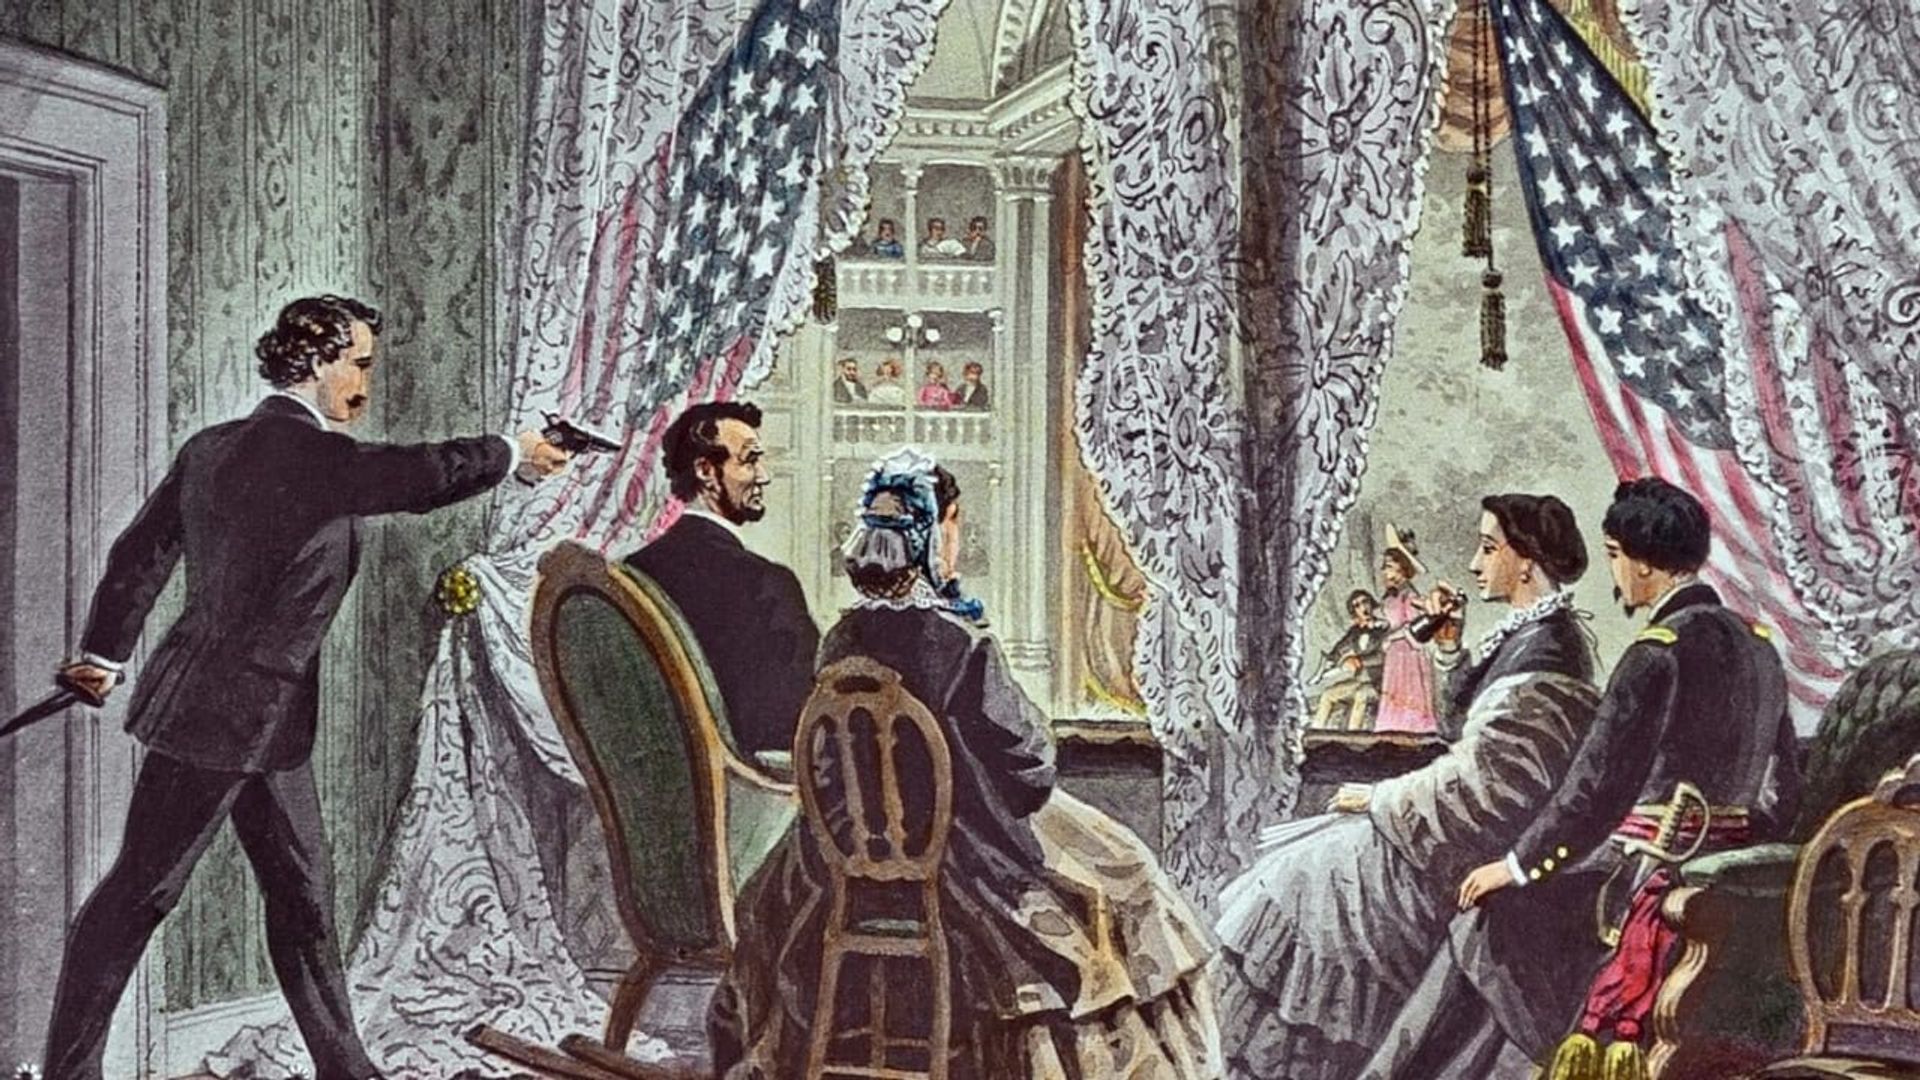 The Lincoln Assassination background